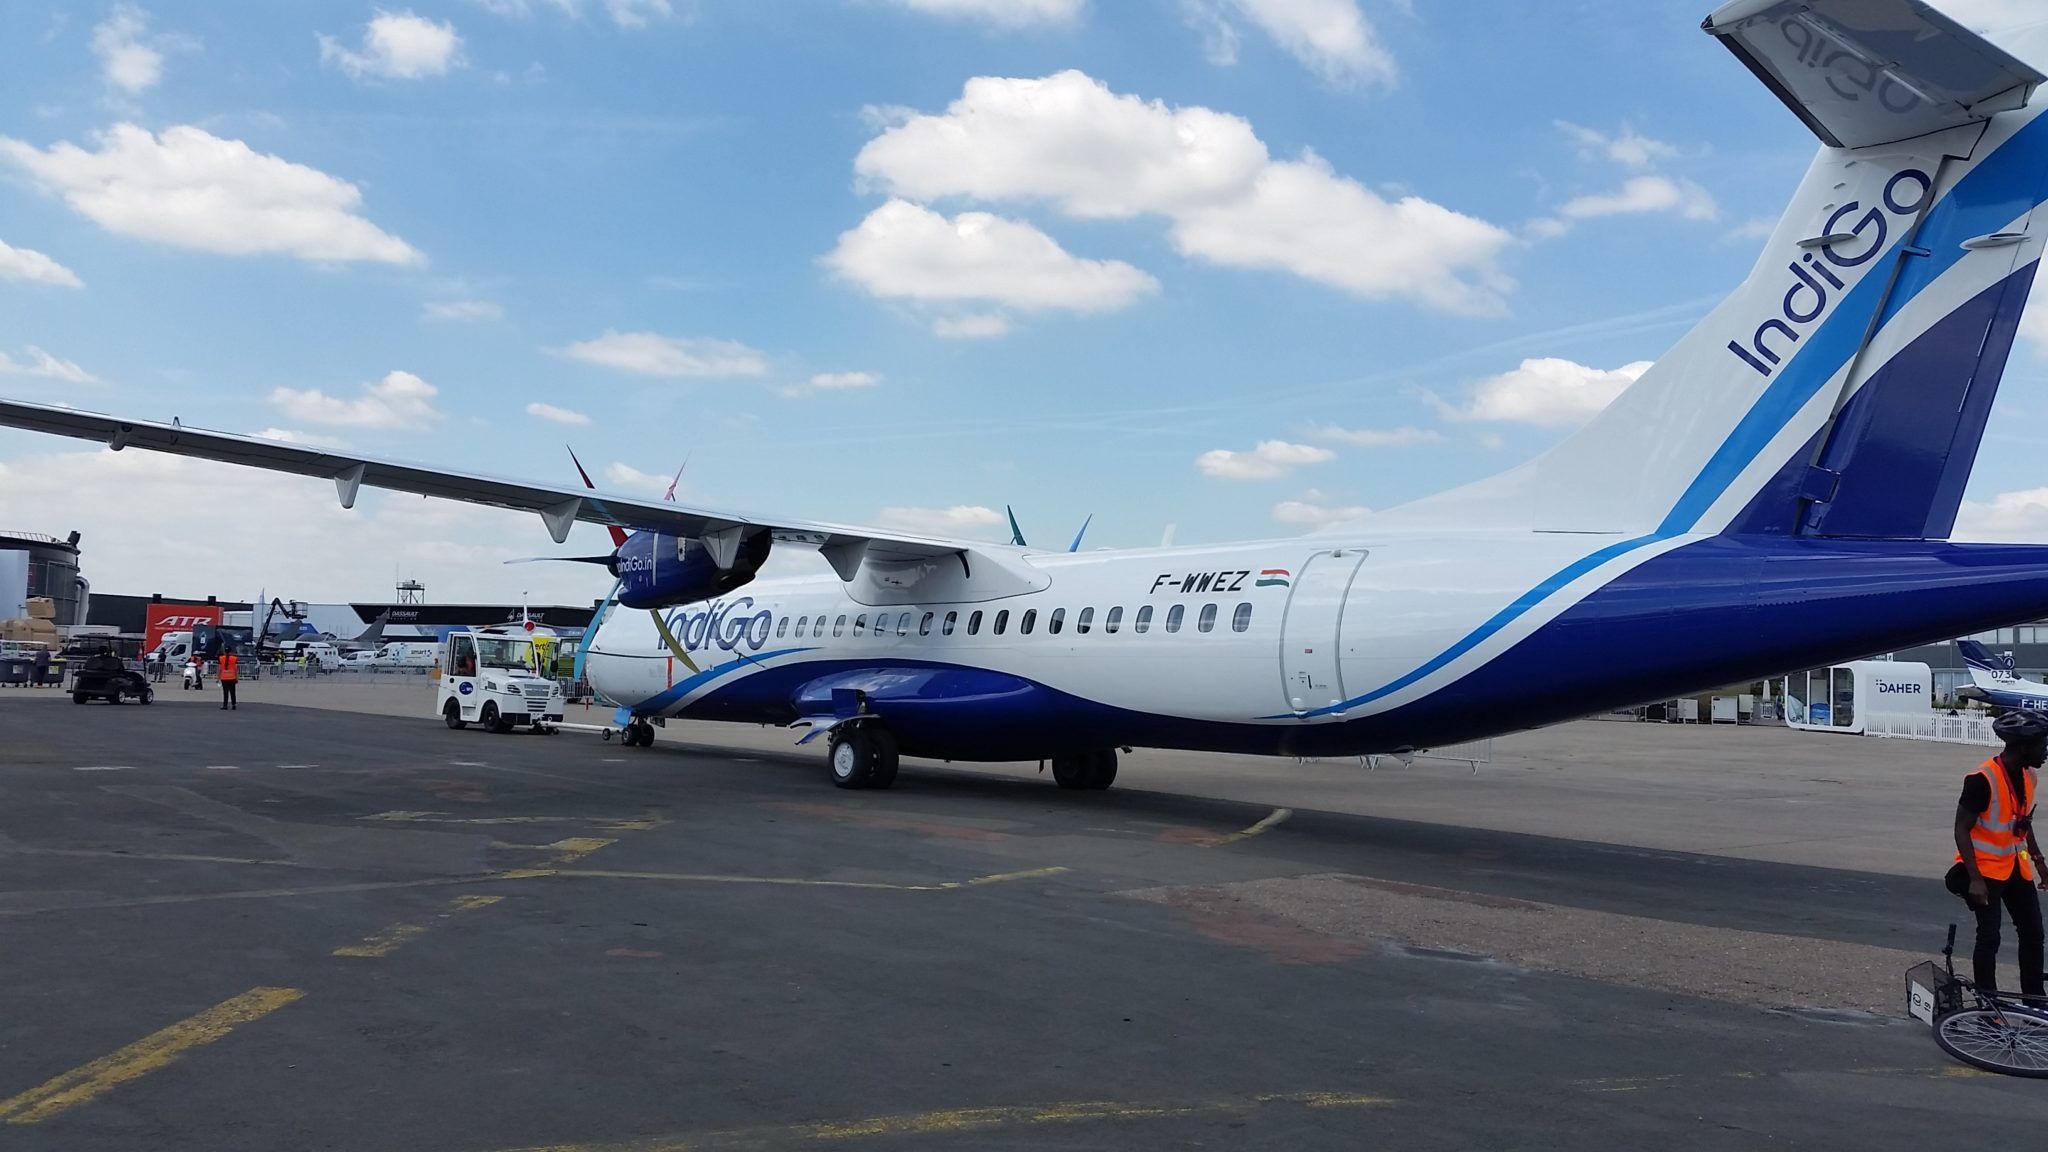 Indian airline takes delivery of its first ATR aircraft